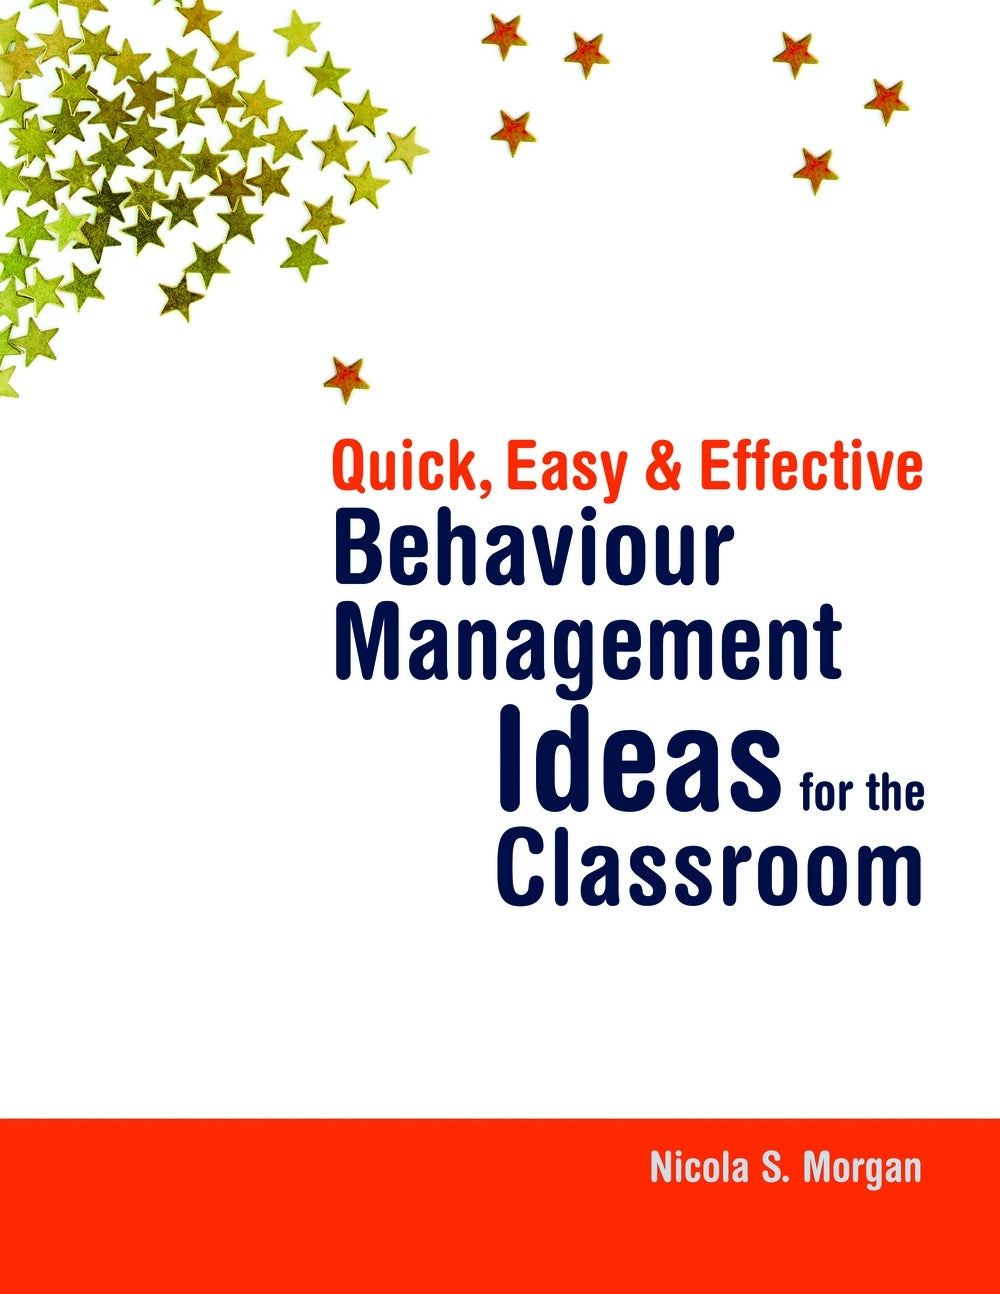 Quick, Easy and Effective Behaviour Management Ideas for the Classroom by Nicola Morgan